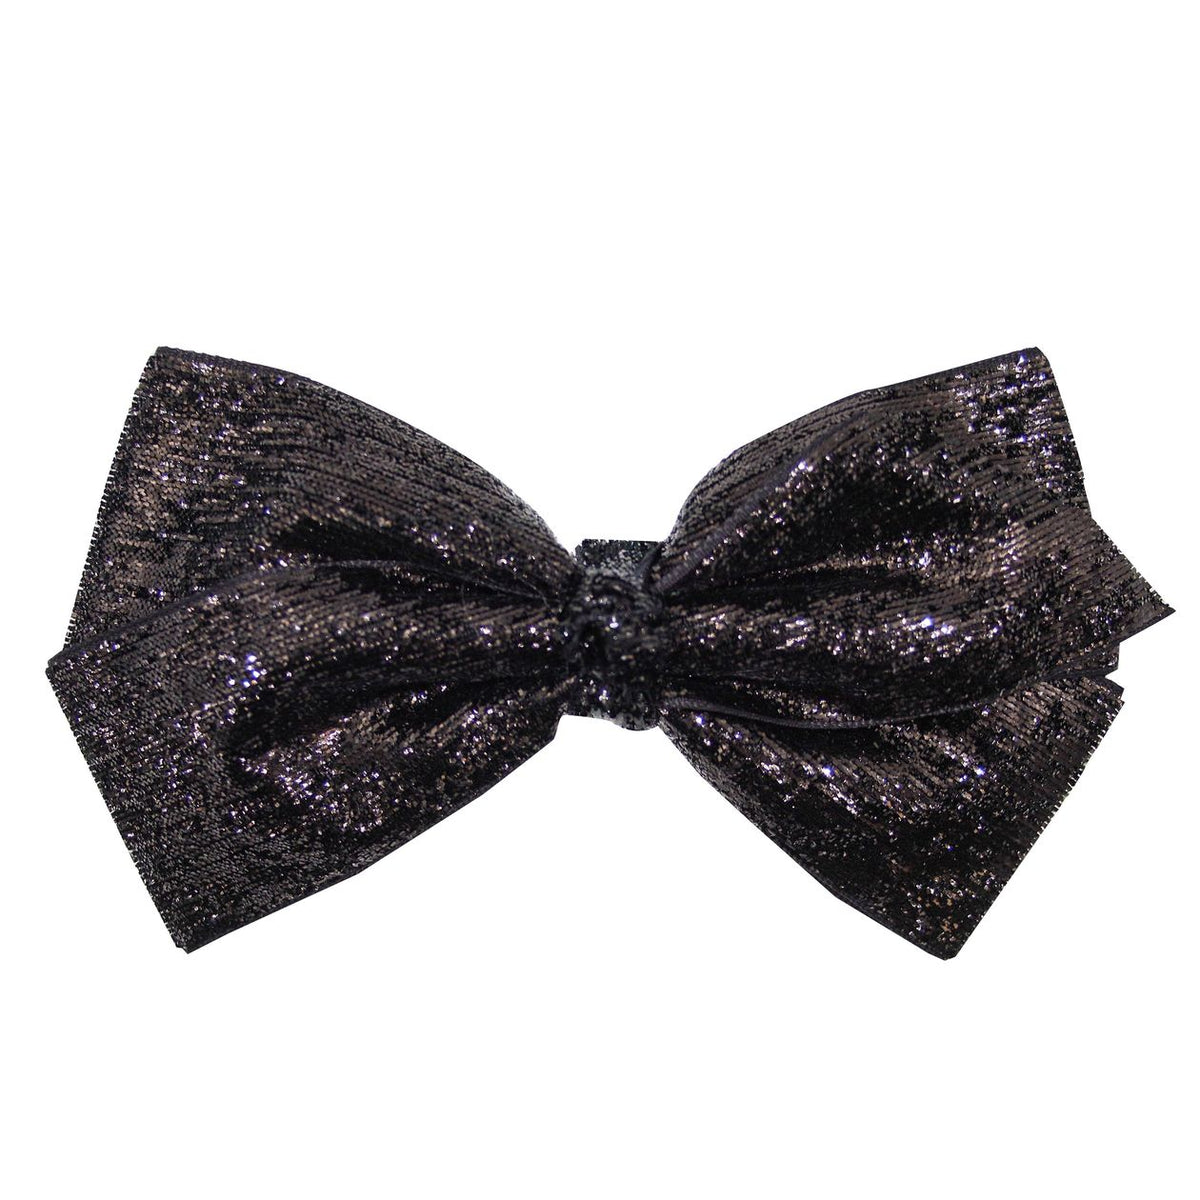 No Shed Glitter Bow - Black